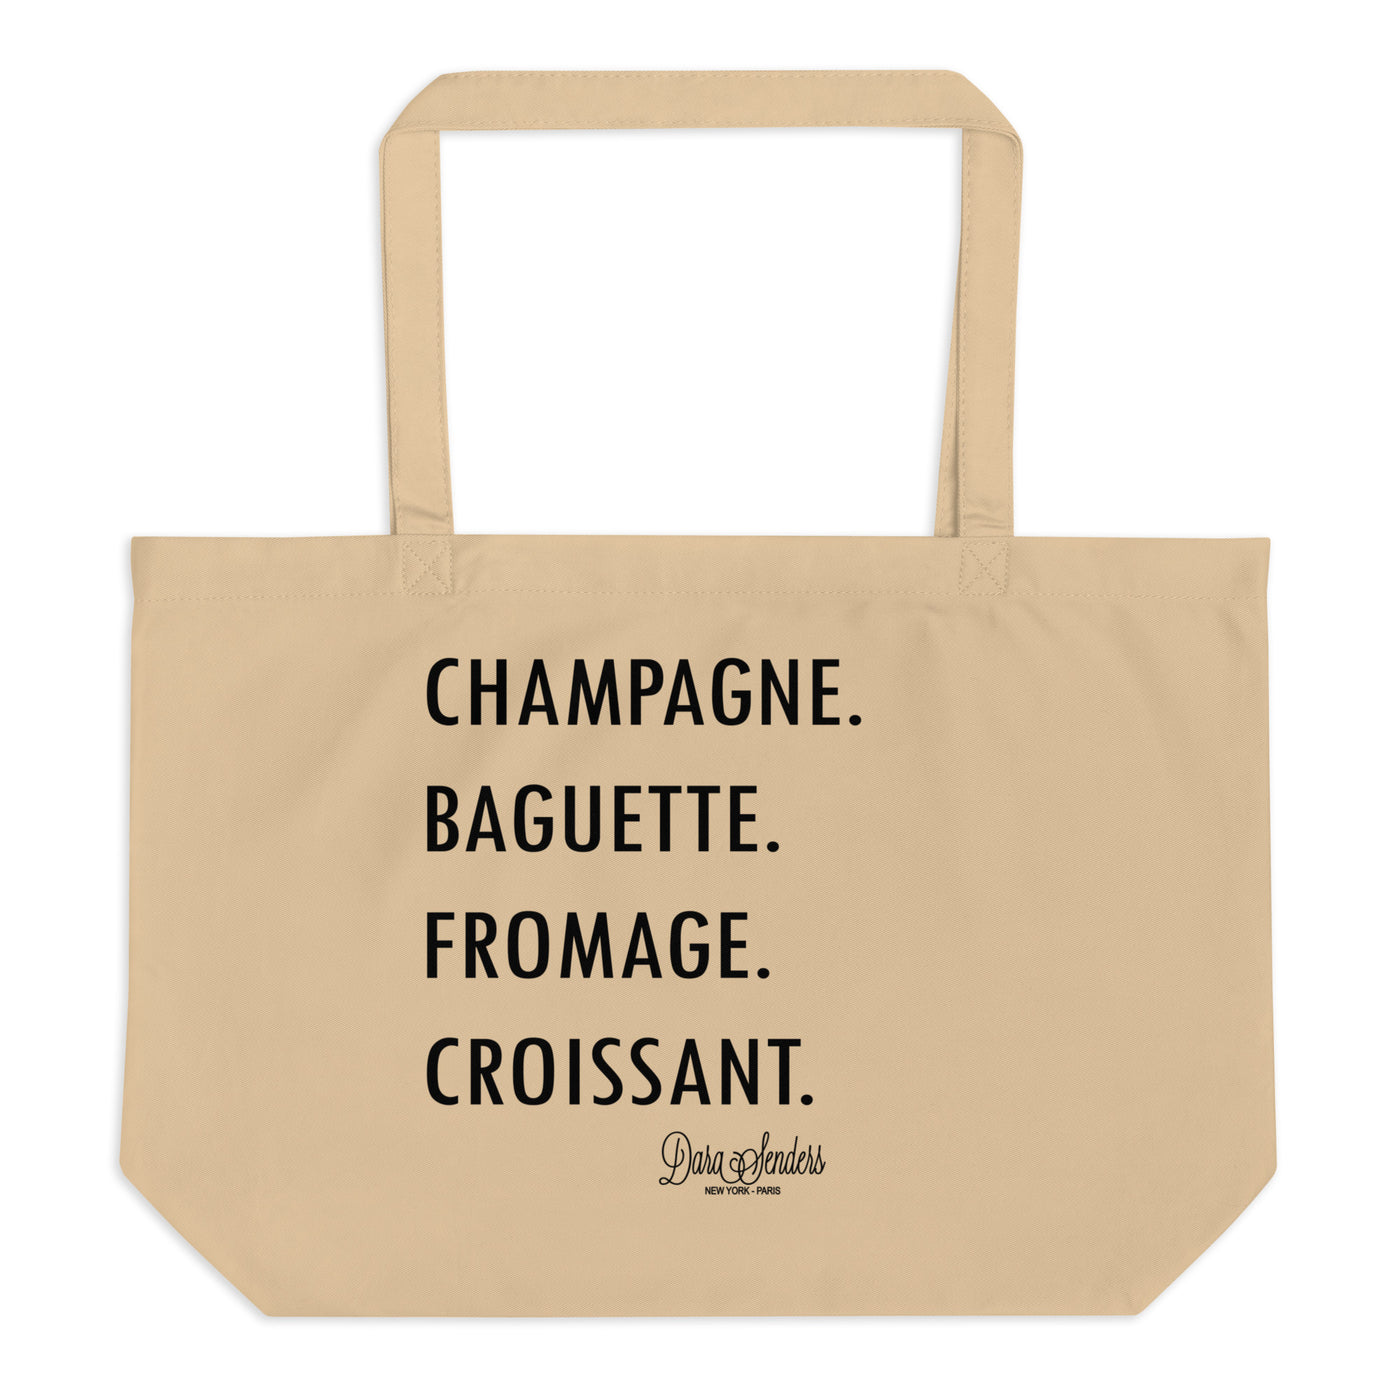 GOURMET LOVE (Champagne, Baguette, Fromage, Croissant) Tshirt -LARGE ORGANIC TOTE BAG